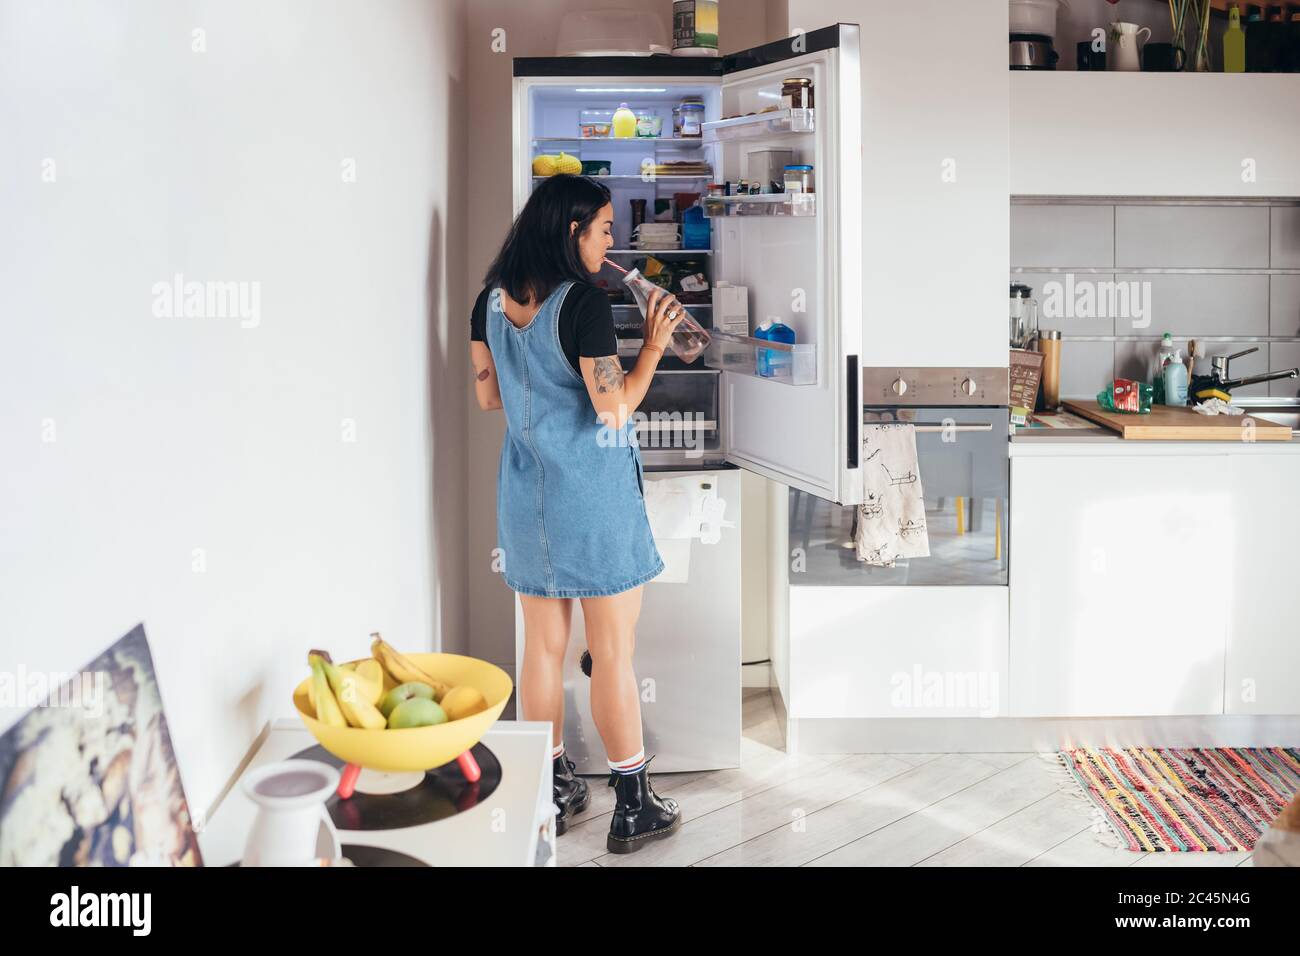 Rear view of tattooed woman with long brown hair wearing denim dress standing in front of open fridge, drinking from bottle. Stock Photo